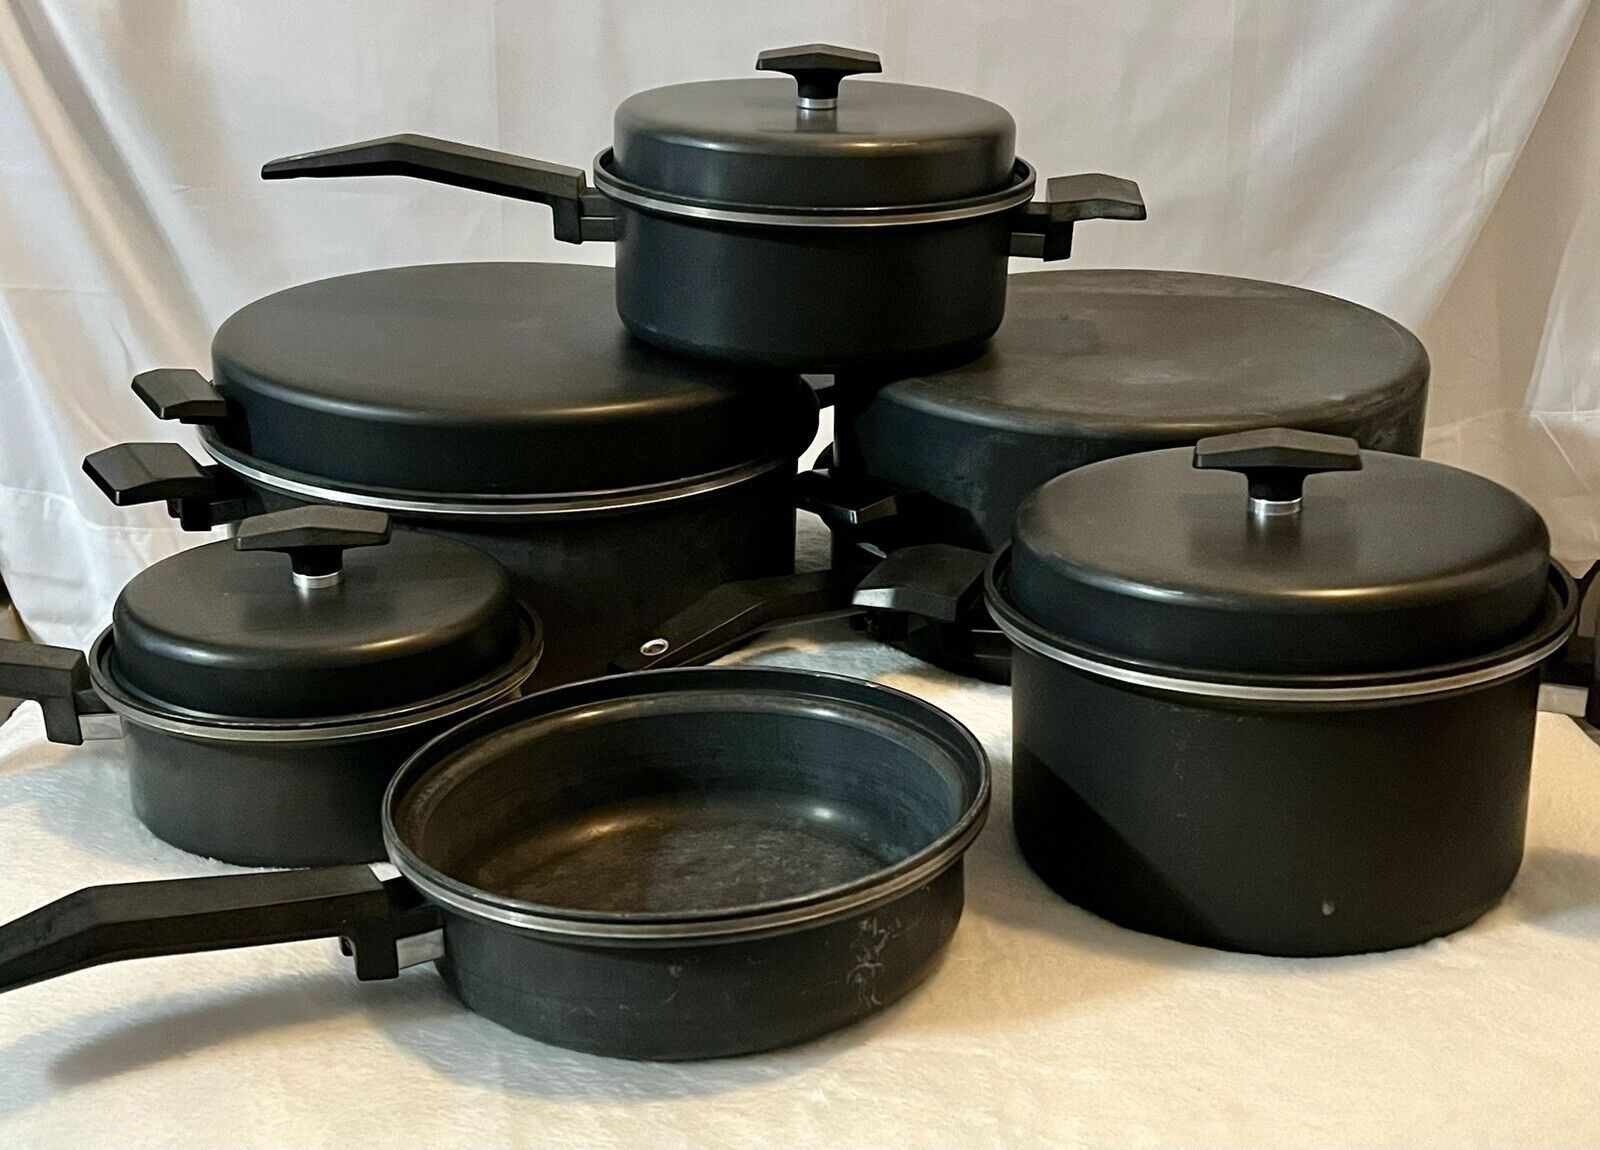 Miracle Maid West Bend Anodized 11 Piece Set MADE IN THE USA Vintage Pots